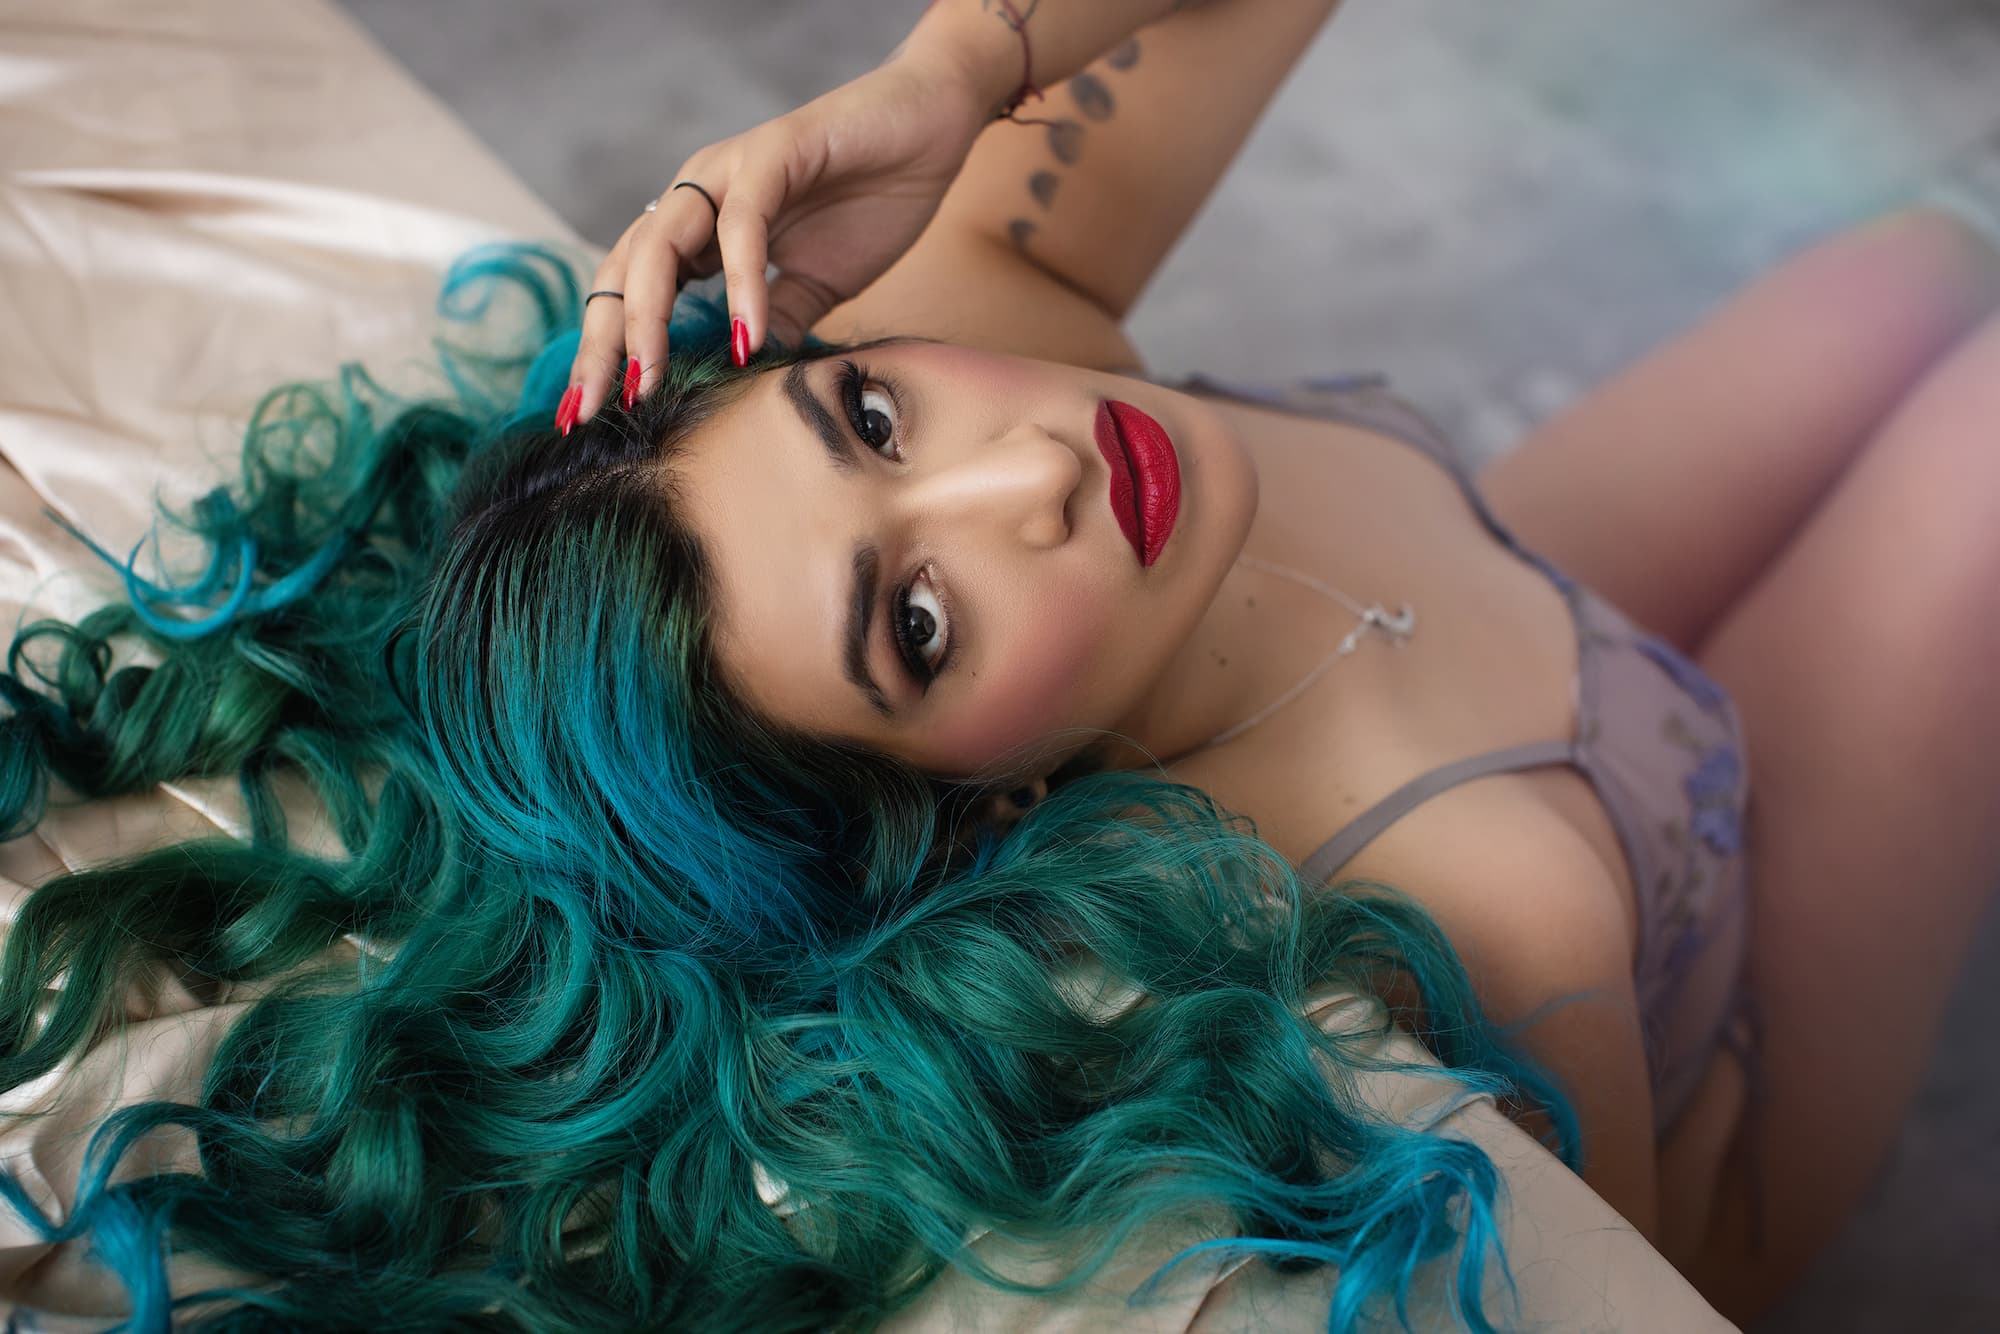 stunning blue haired woman posing gracefully for a boudoir shoot